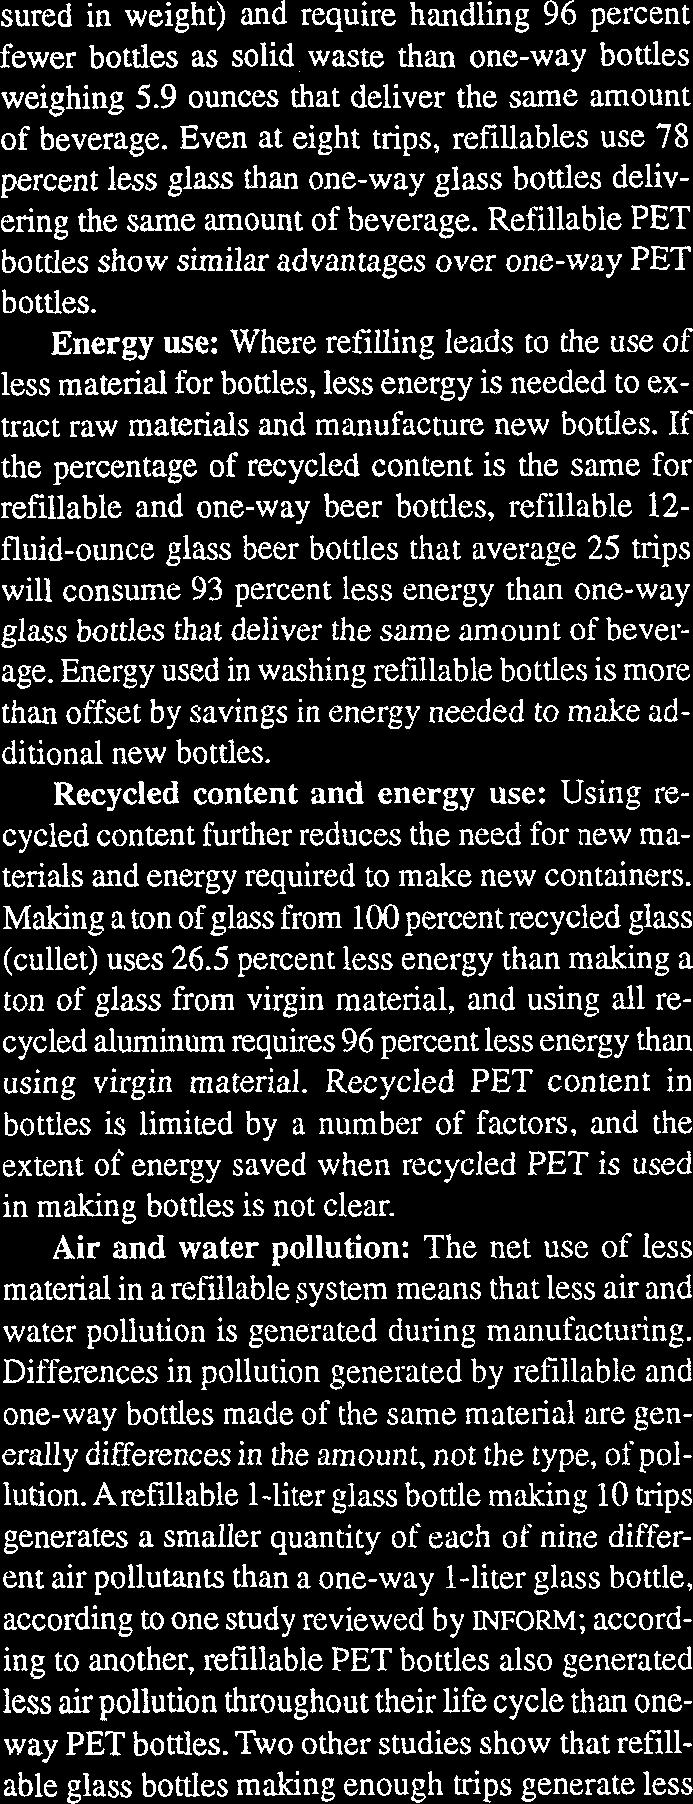 one-way glass bottles that deliver the same amount of beverage. Energy used in washing refillable bottles is more than offset by savings in energy needed to make additional new bottles.